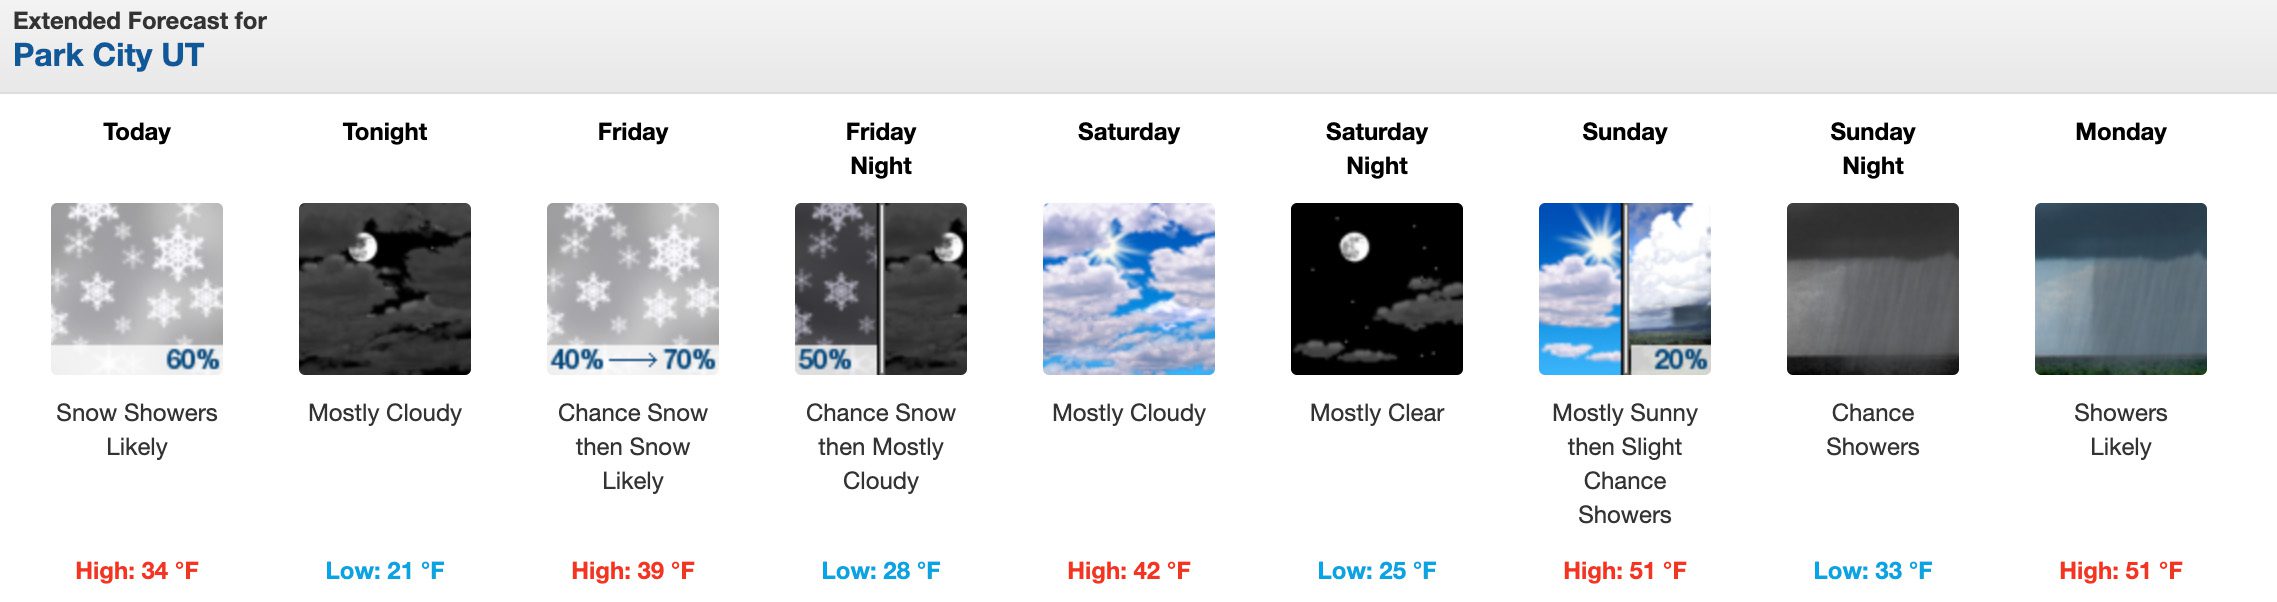 Extended weather forecast for Park City from the NWS.